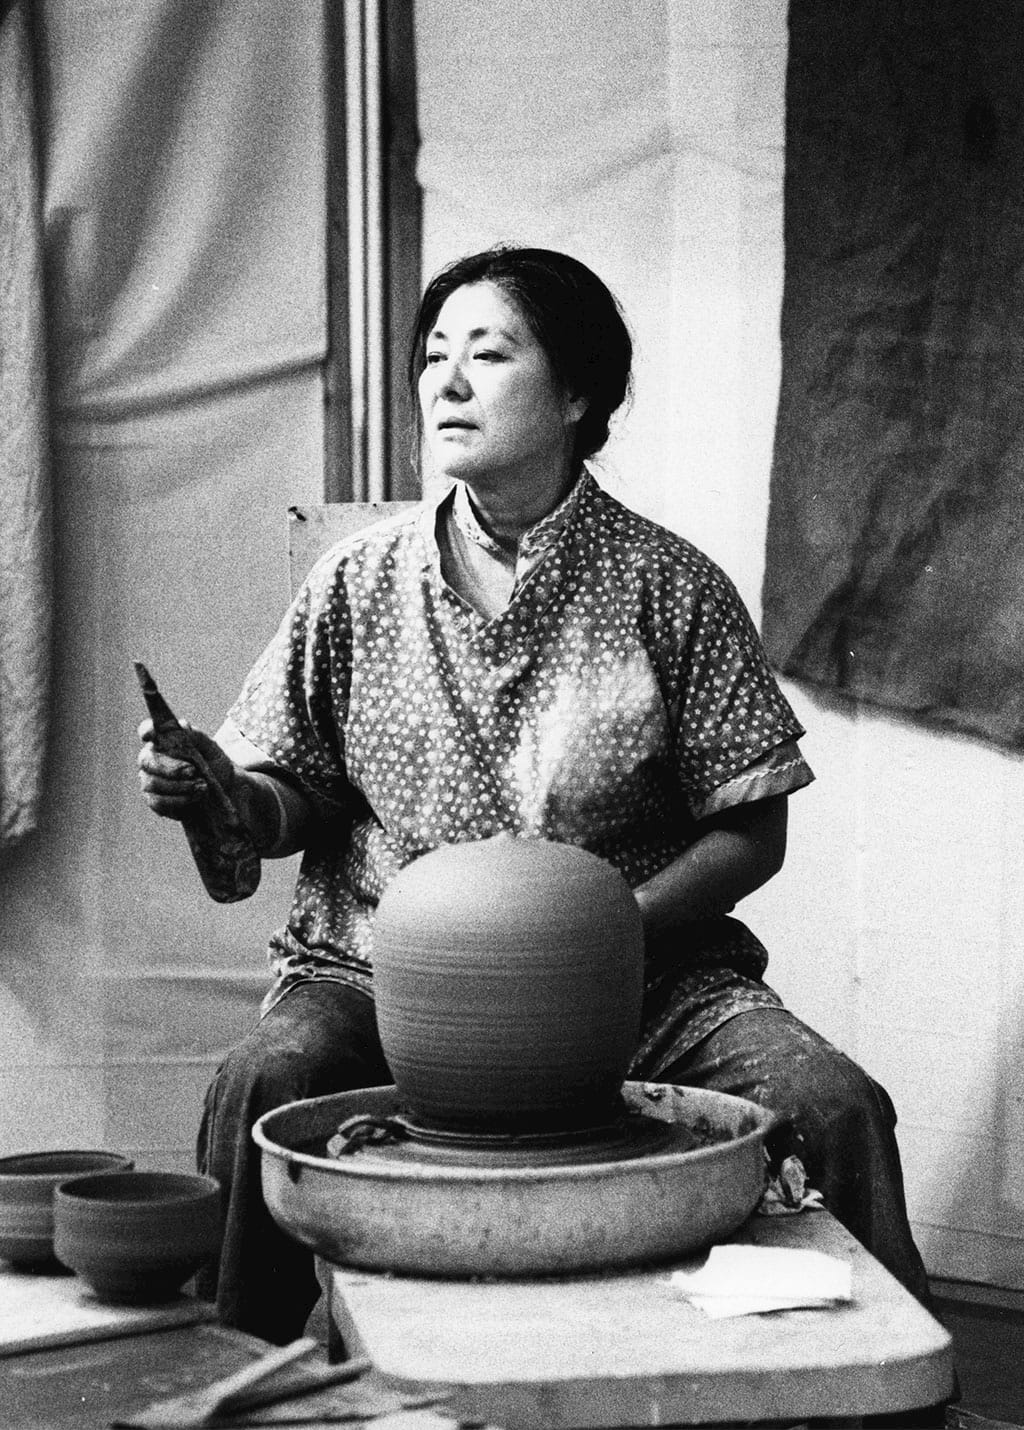 Toshiko Takaezu at the wheel. Courtesy of the American Craft Council